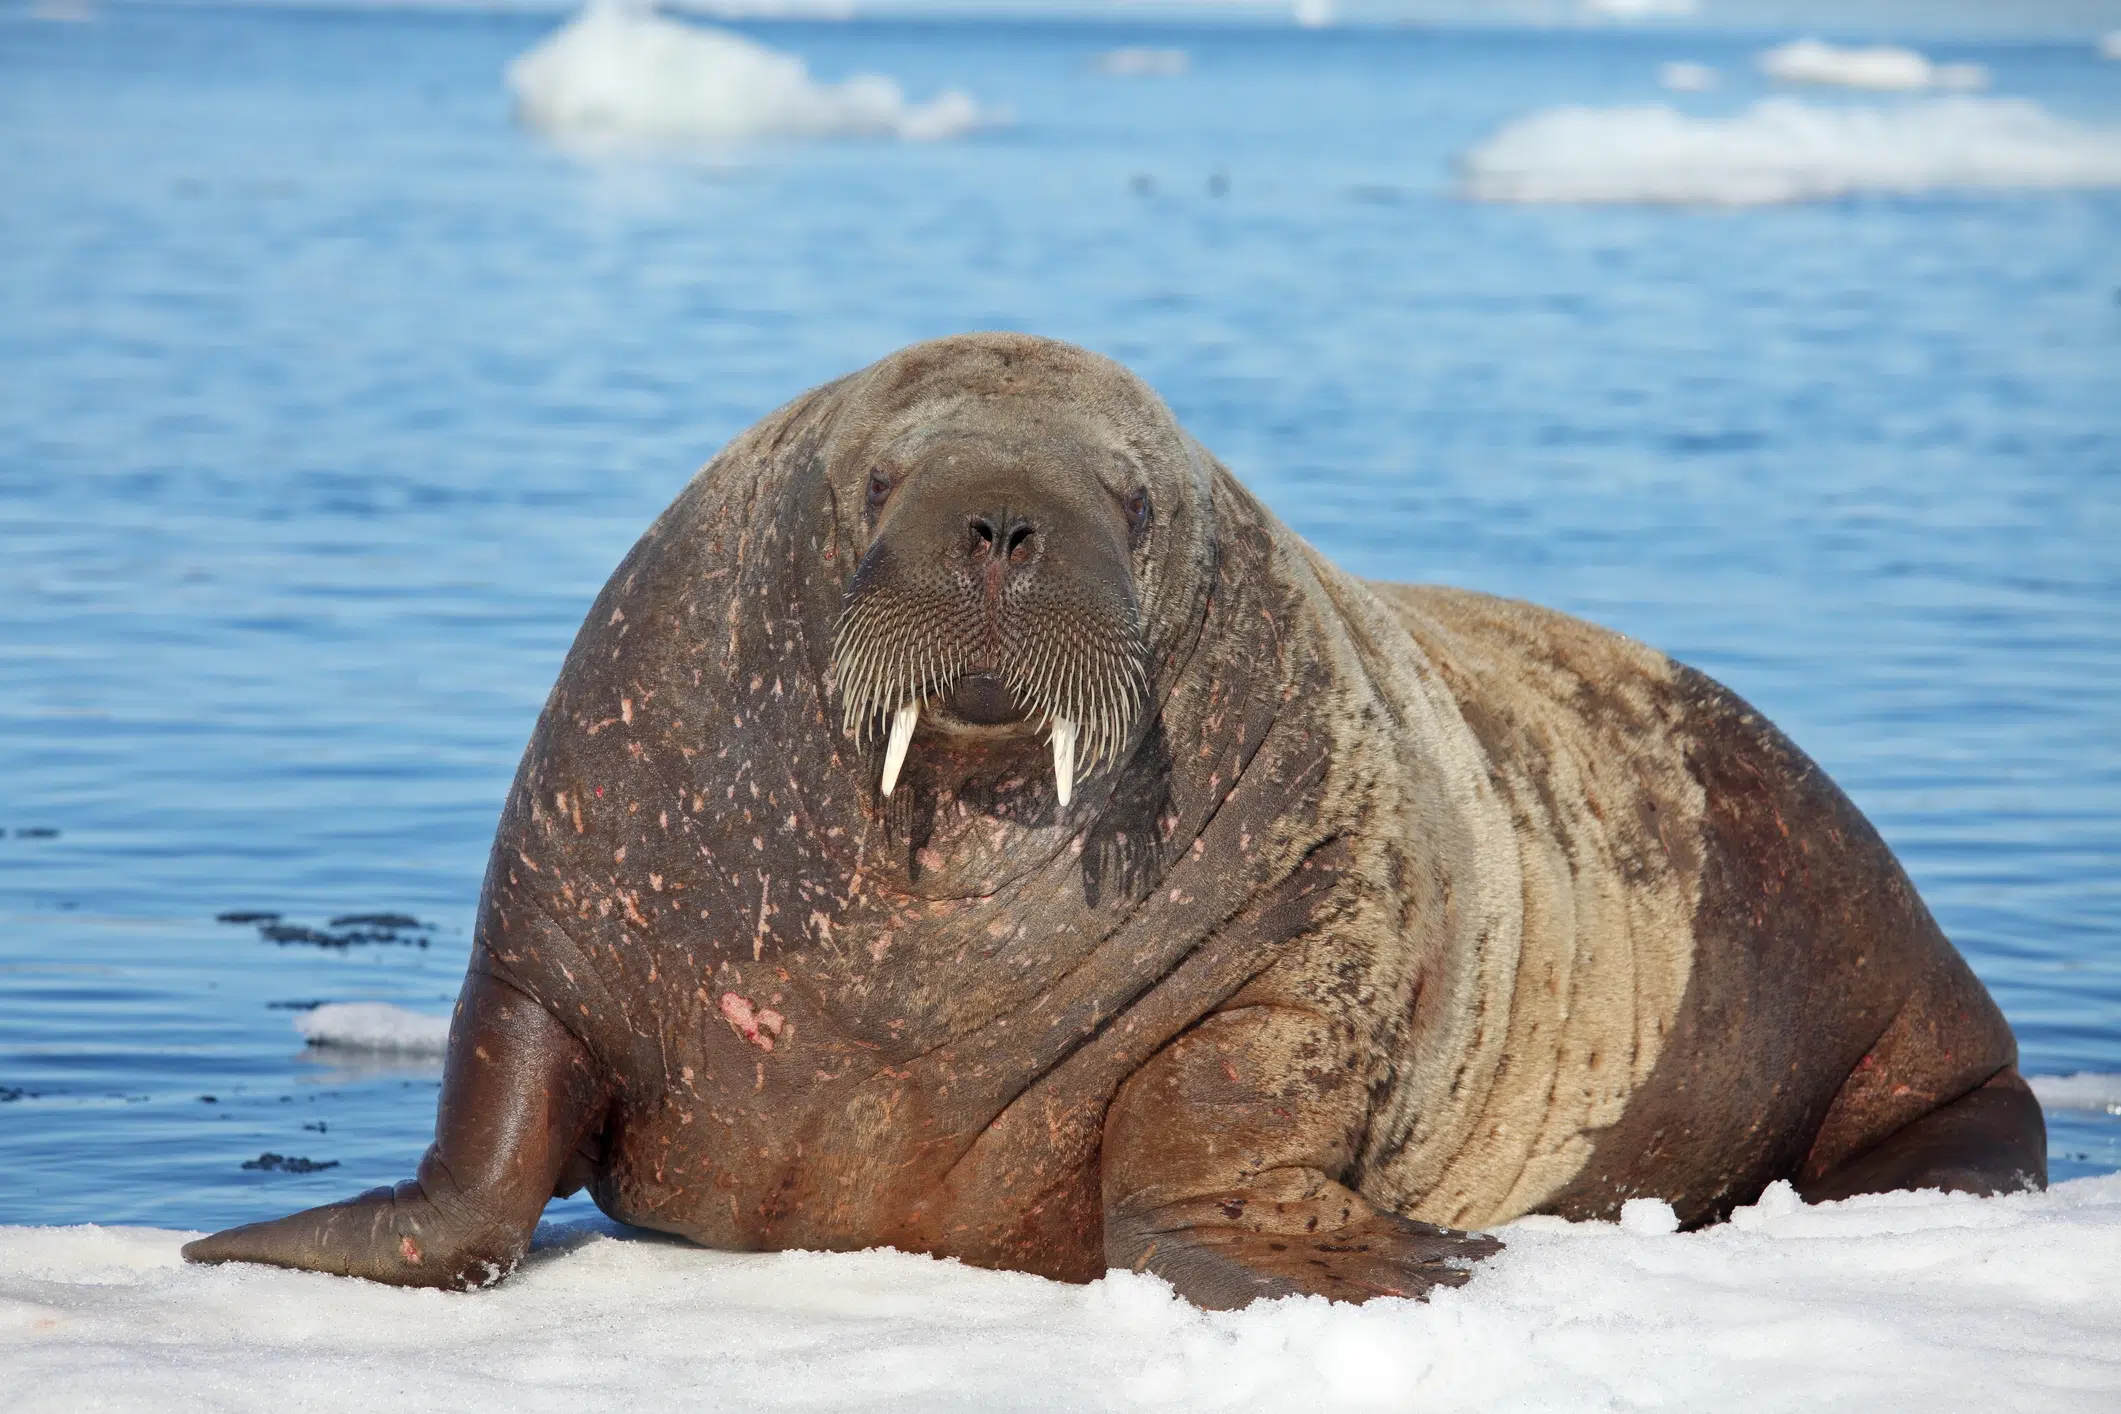 A Walrus took a nap on an iceberg and woke up in Ireland